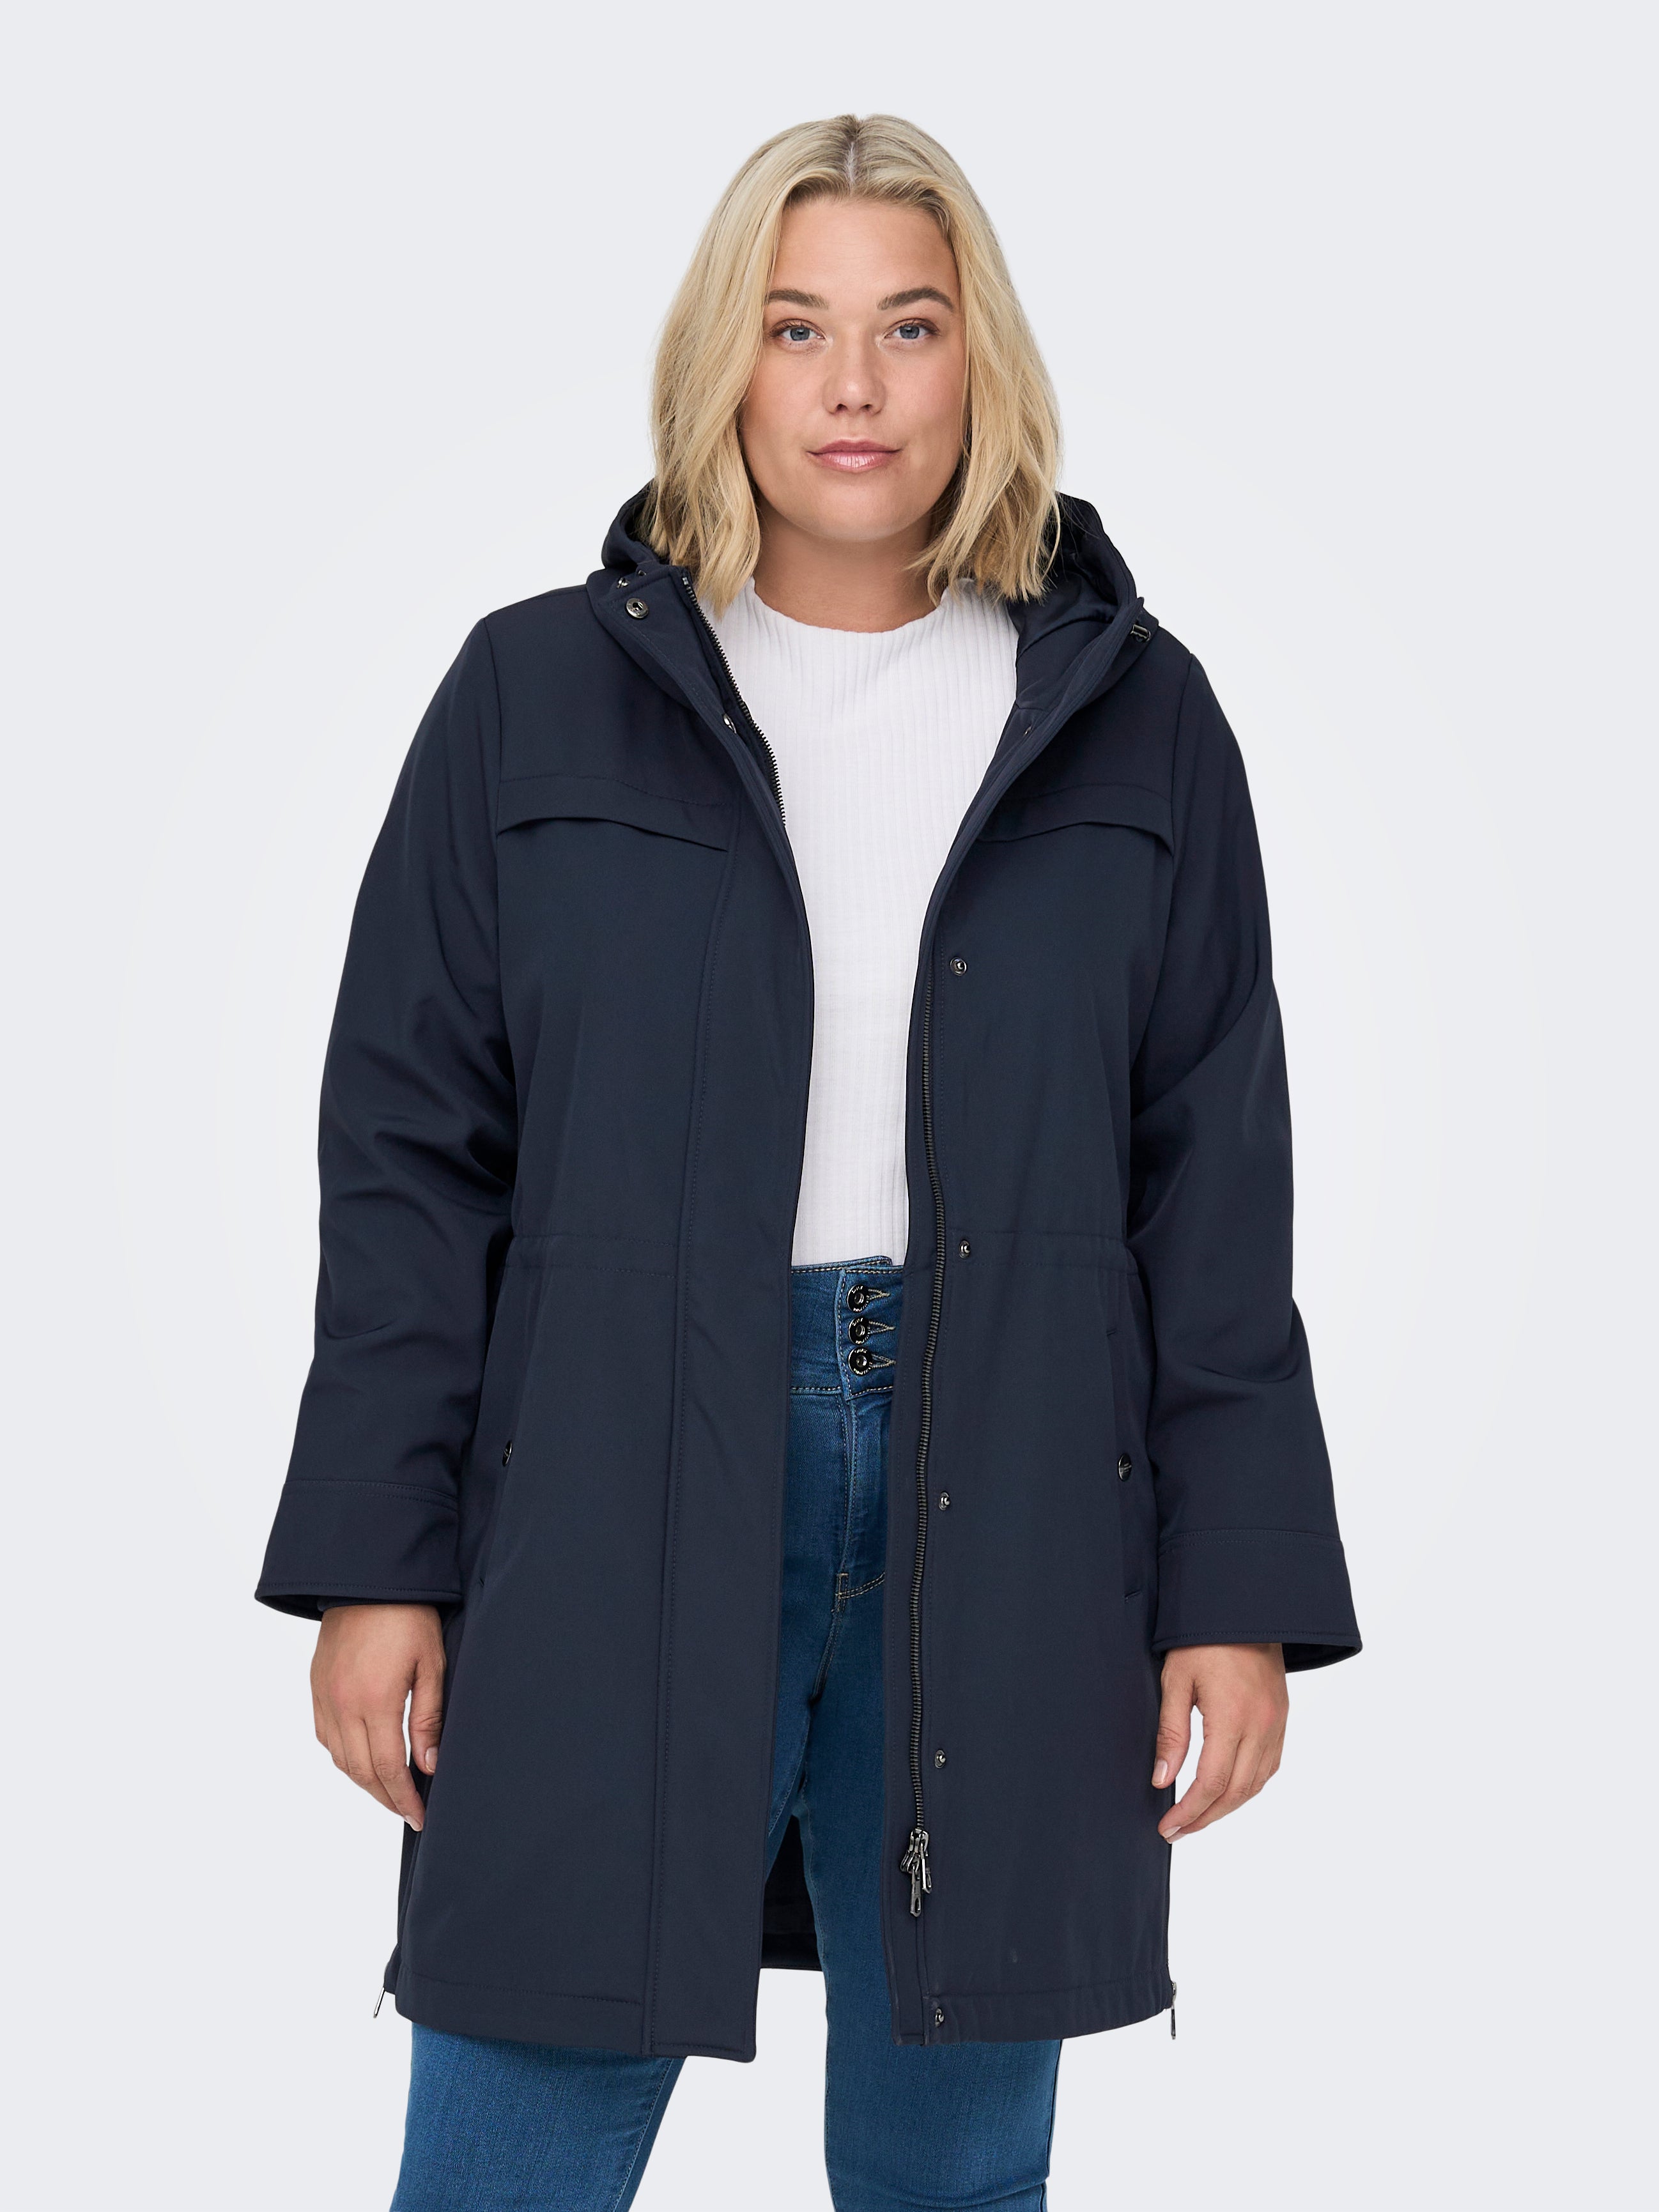 Is this jacket for too heavy winter only ? : r/IndianFashionAddicts